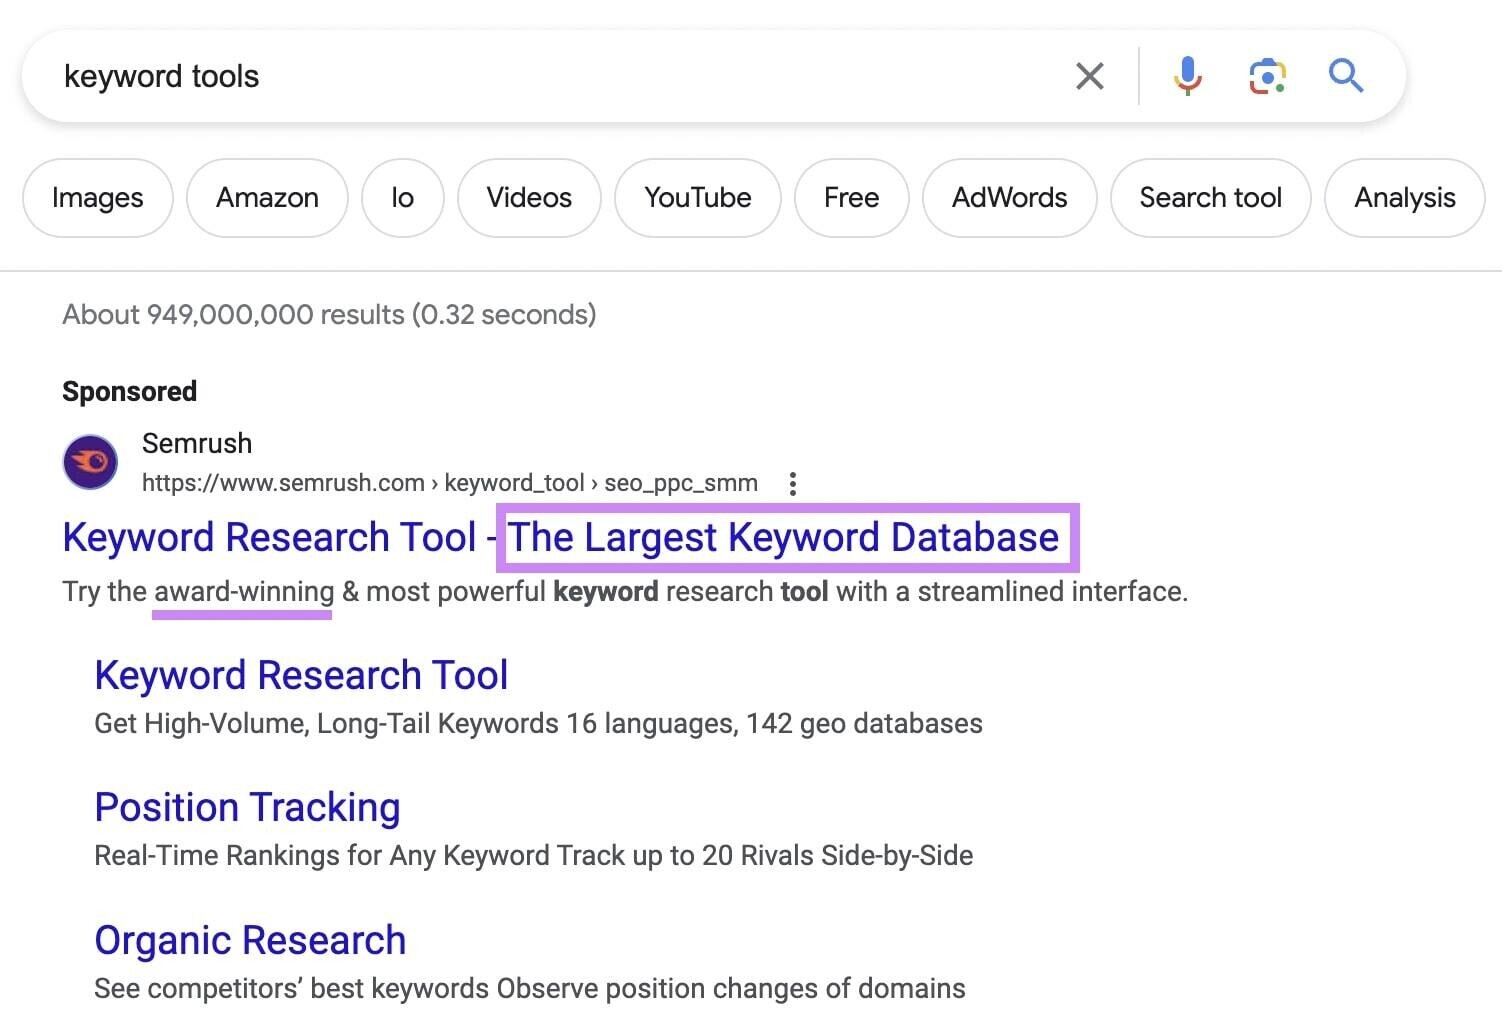 Keyword Research Tool PPC ad copy on SERP